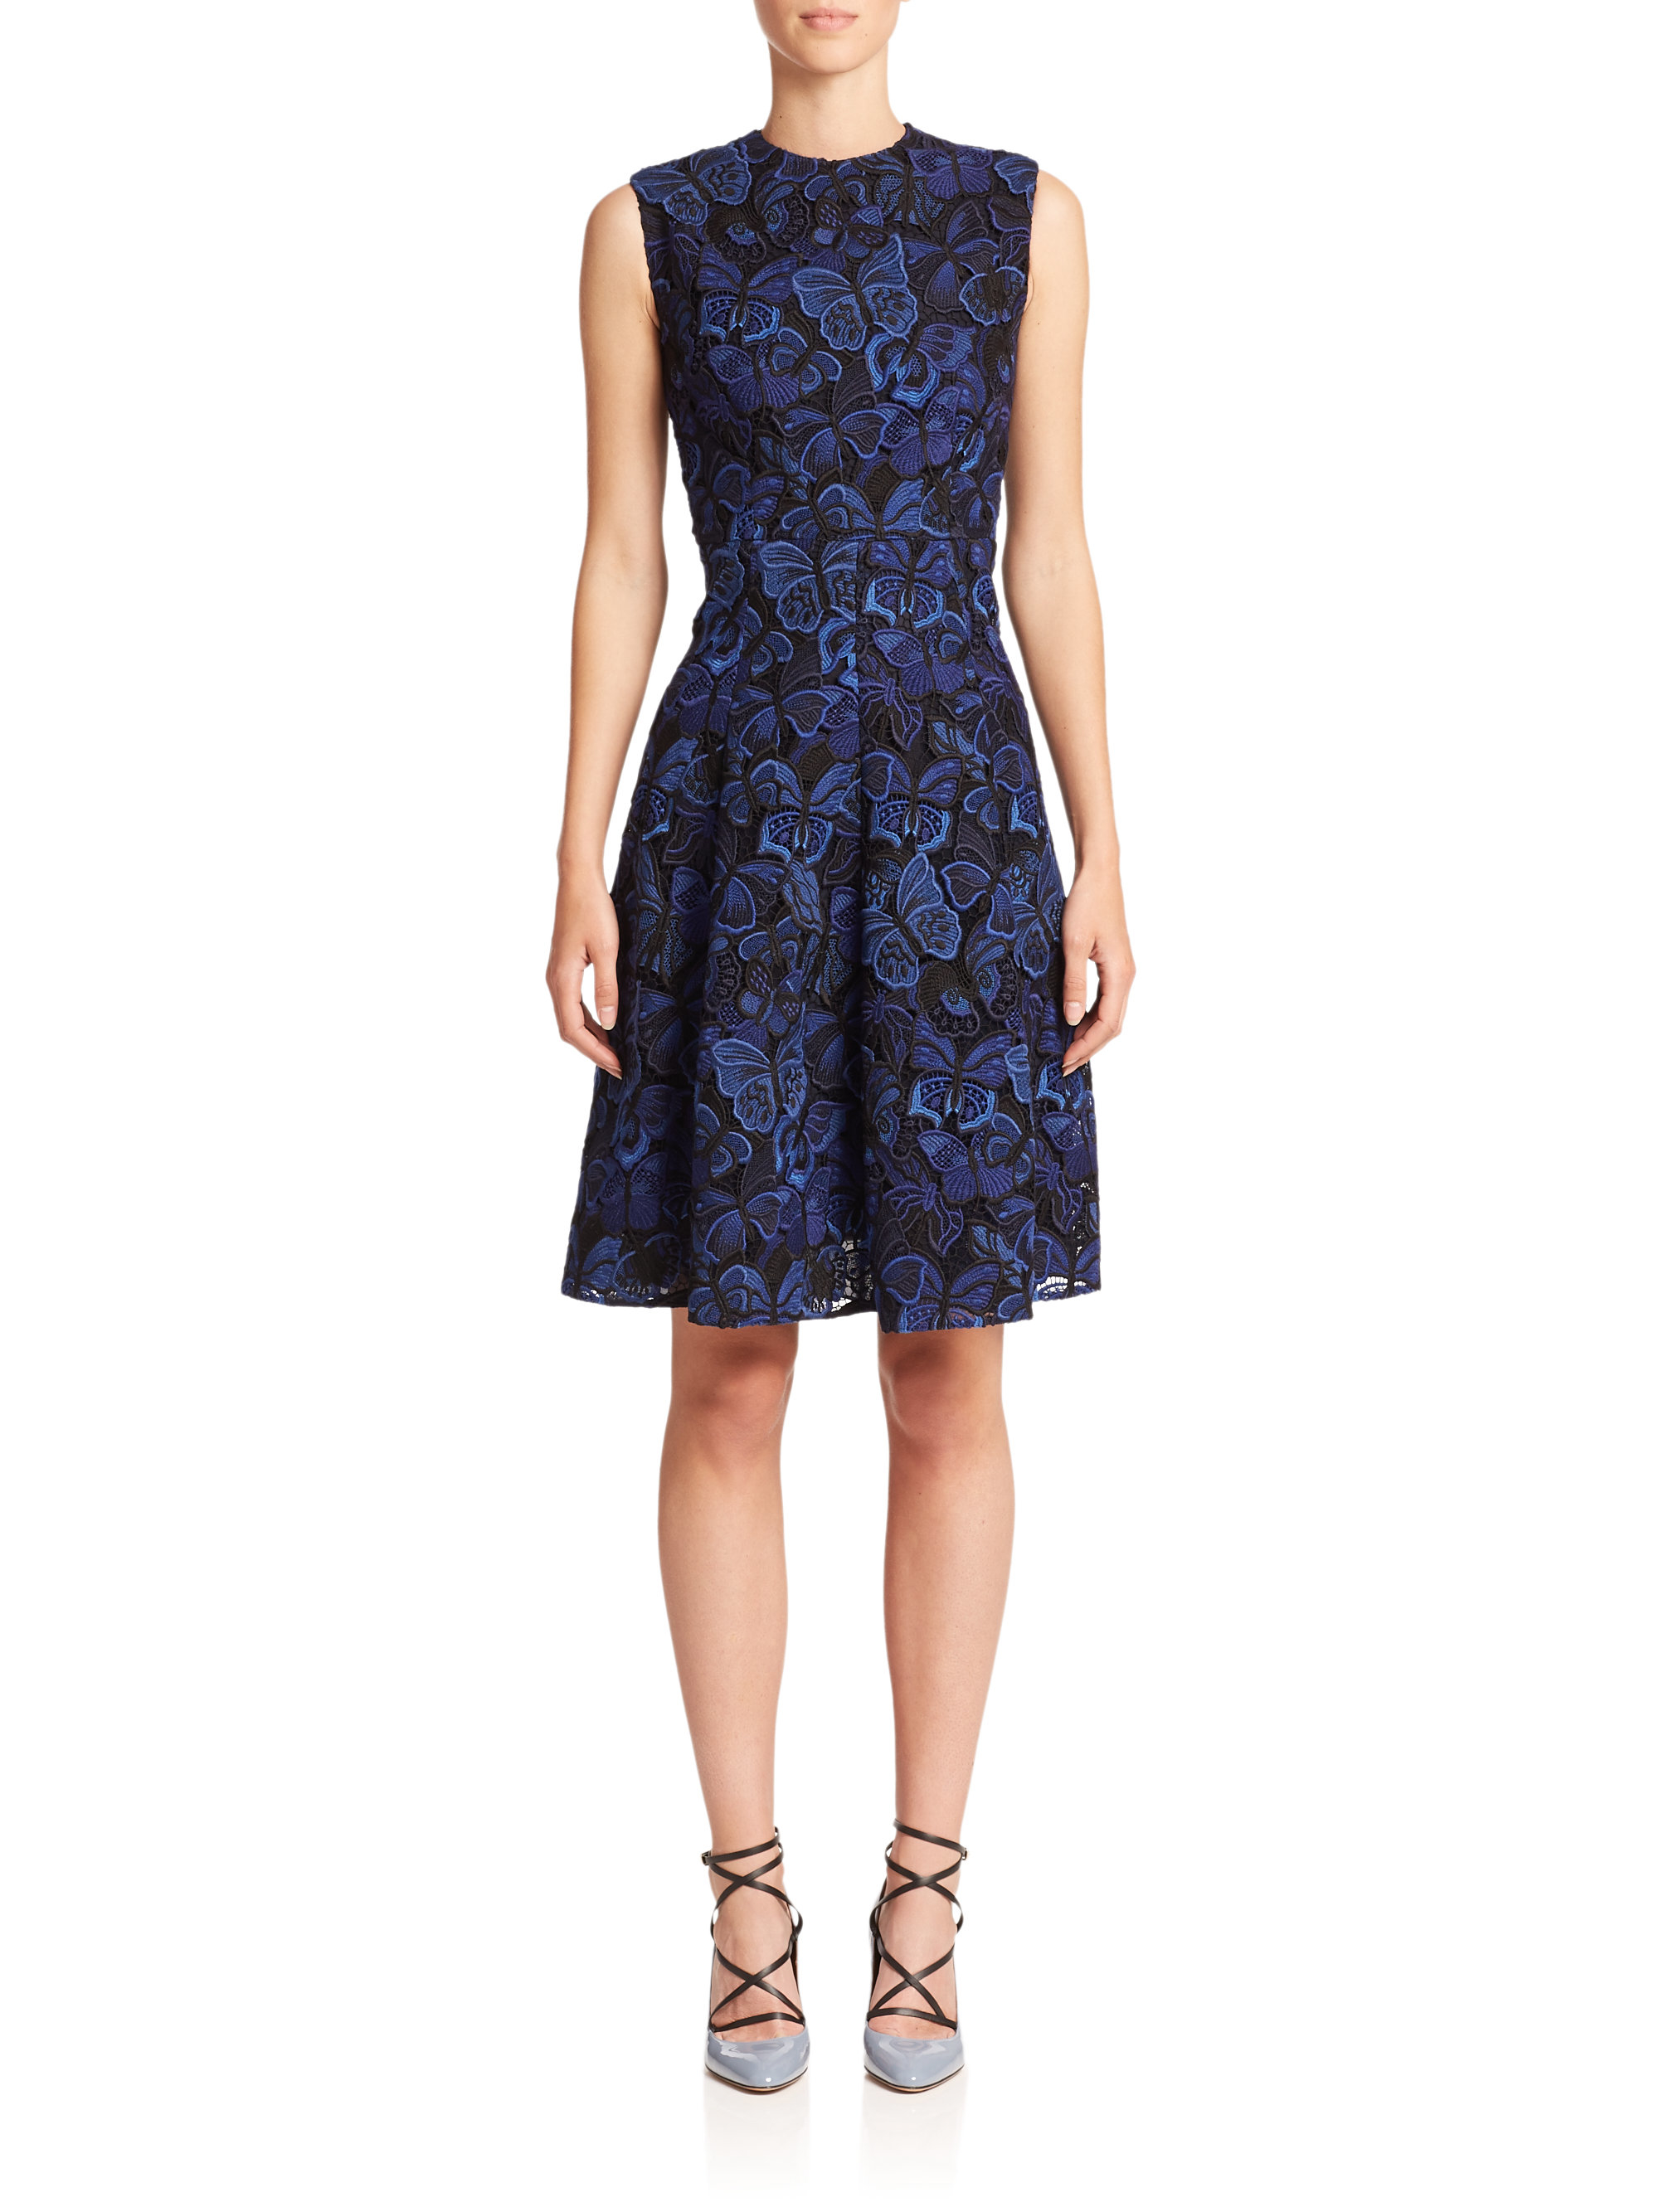 Valentino butterfly guipure-lace dress in navy blue 2015 | Lace dress ...